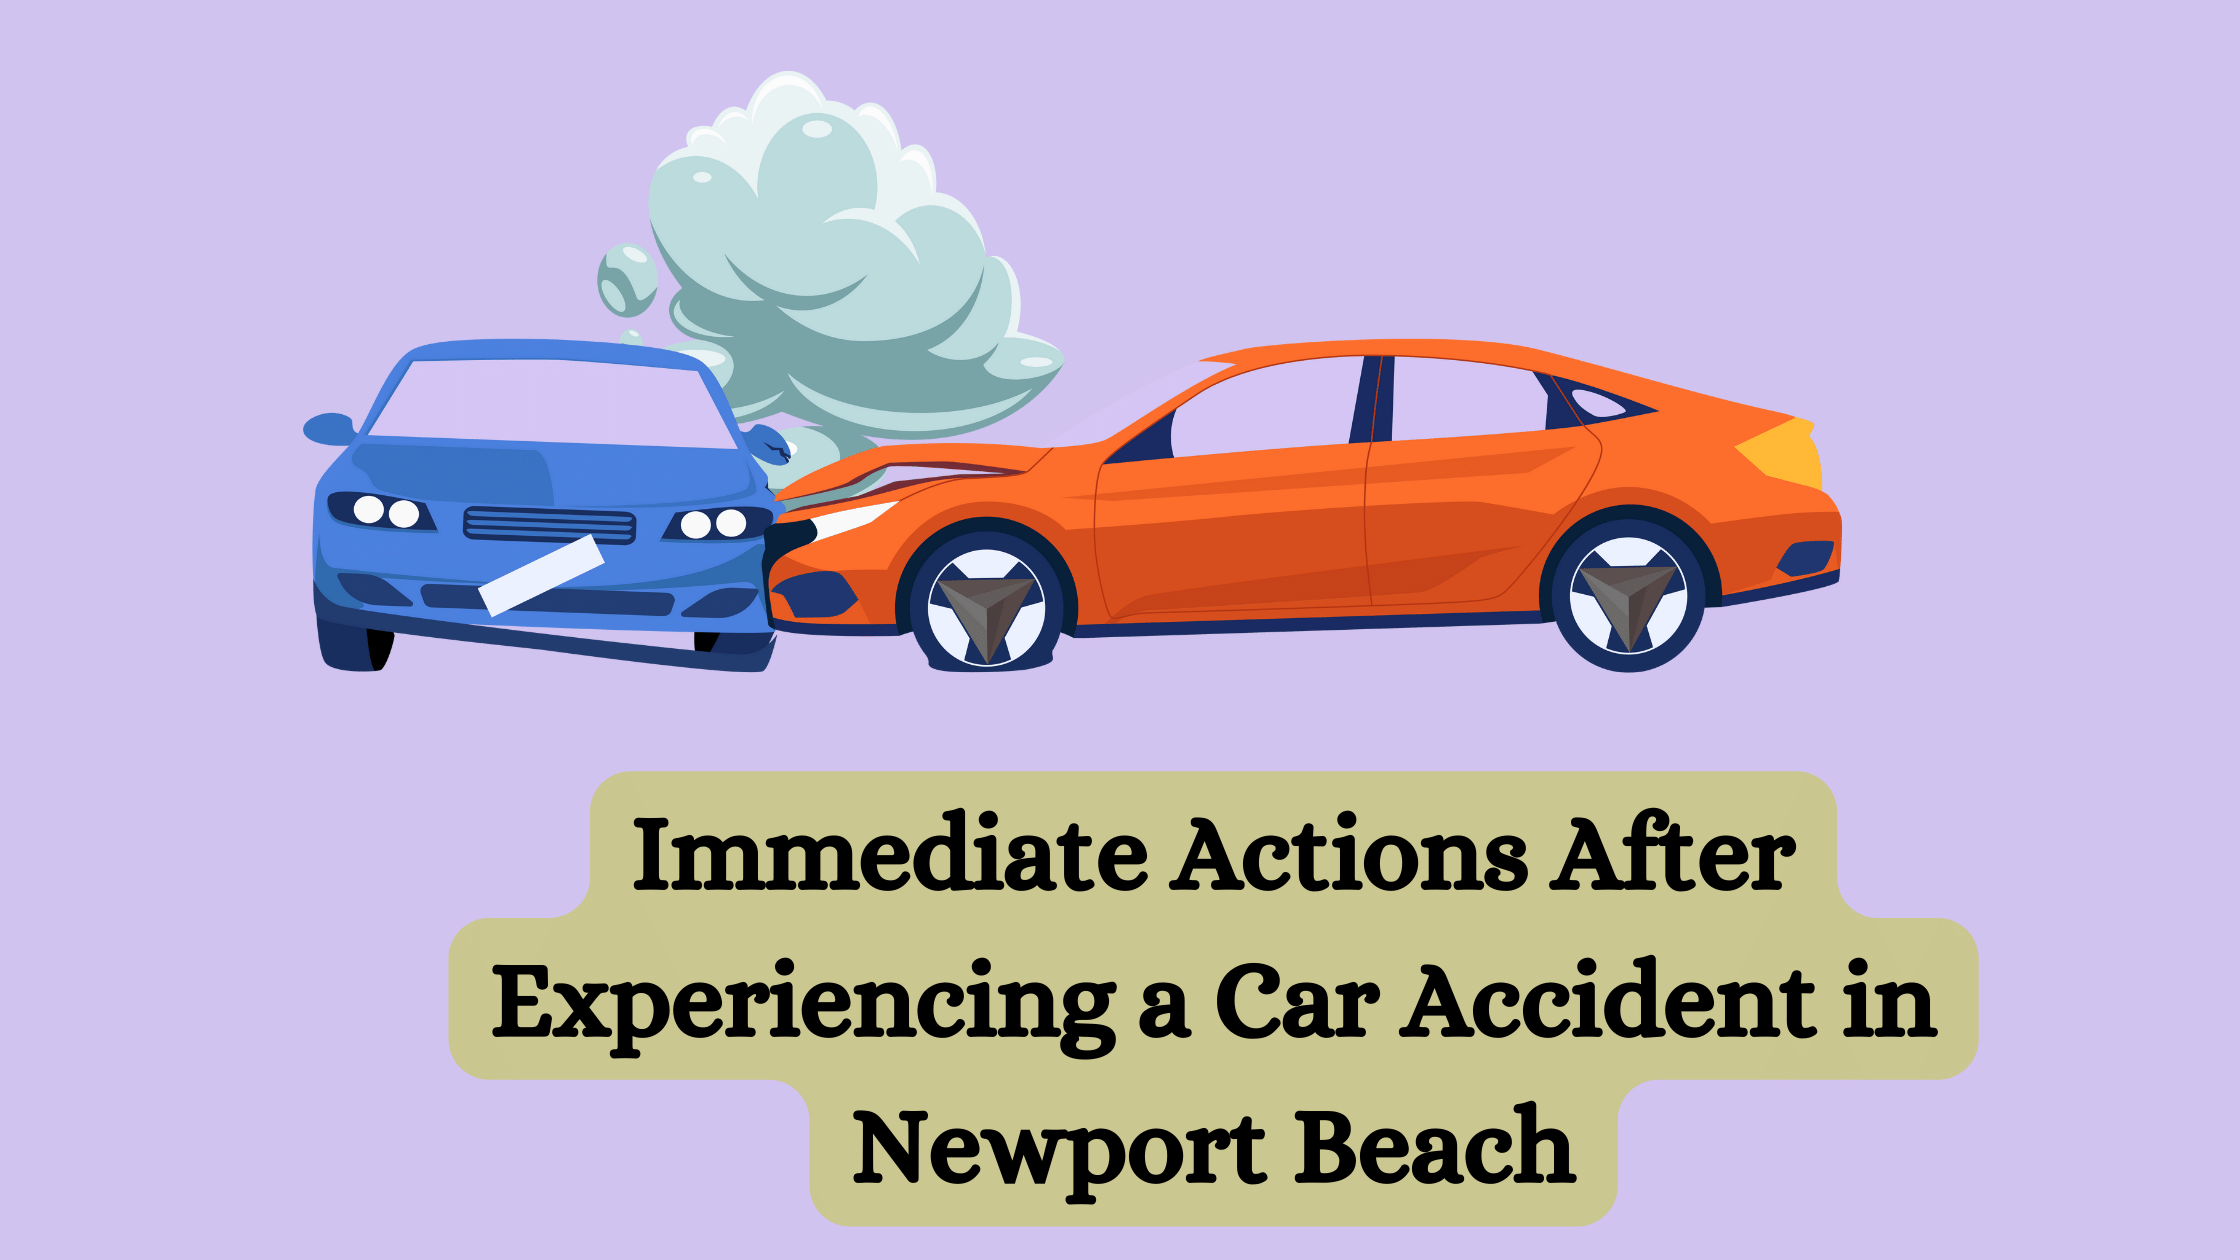 Immediate Actions After Experiencing a Car Accident